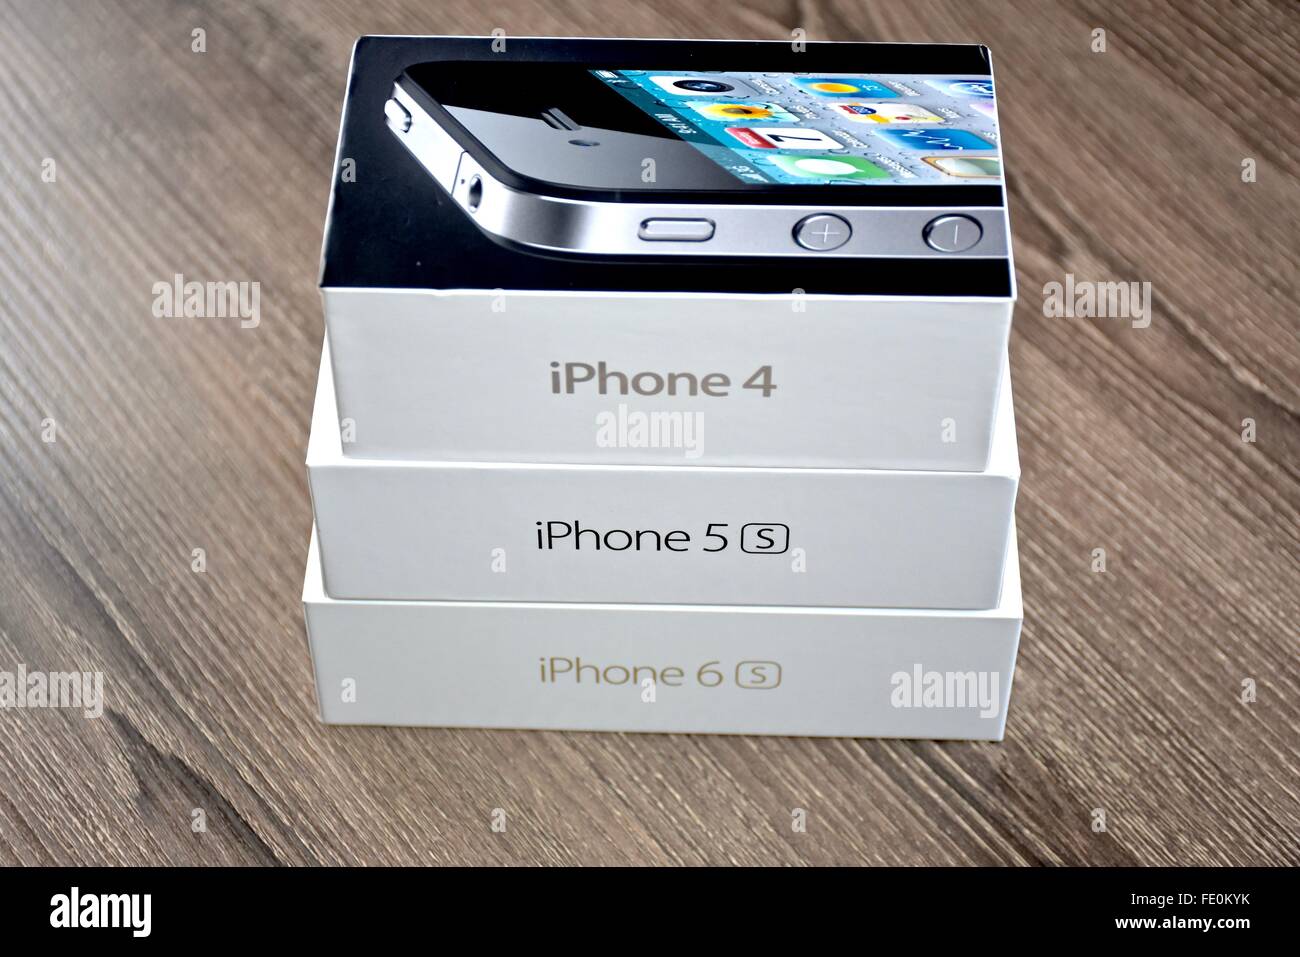 Apple iPhone box on a wood surface Stock Photo